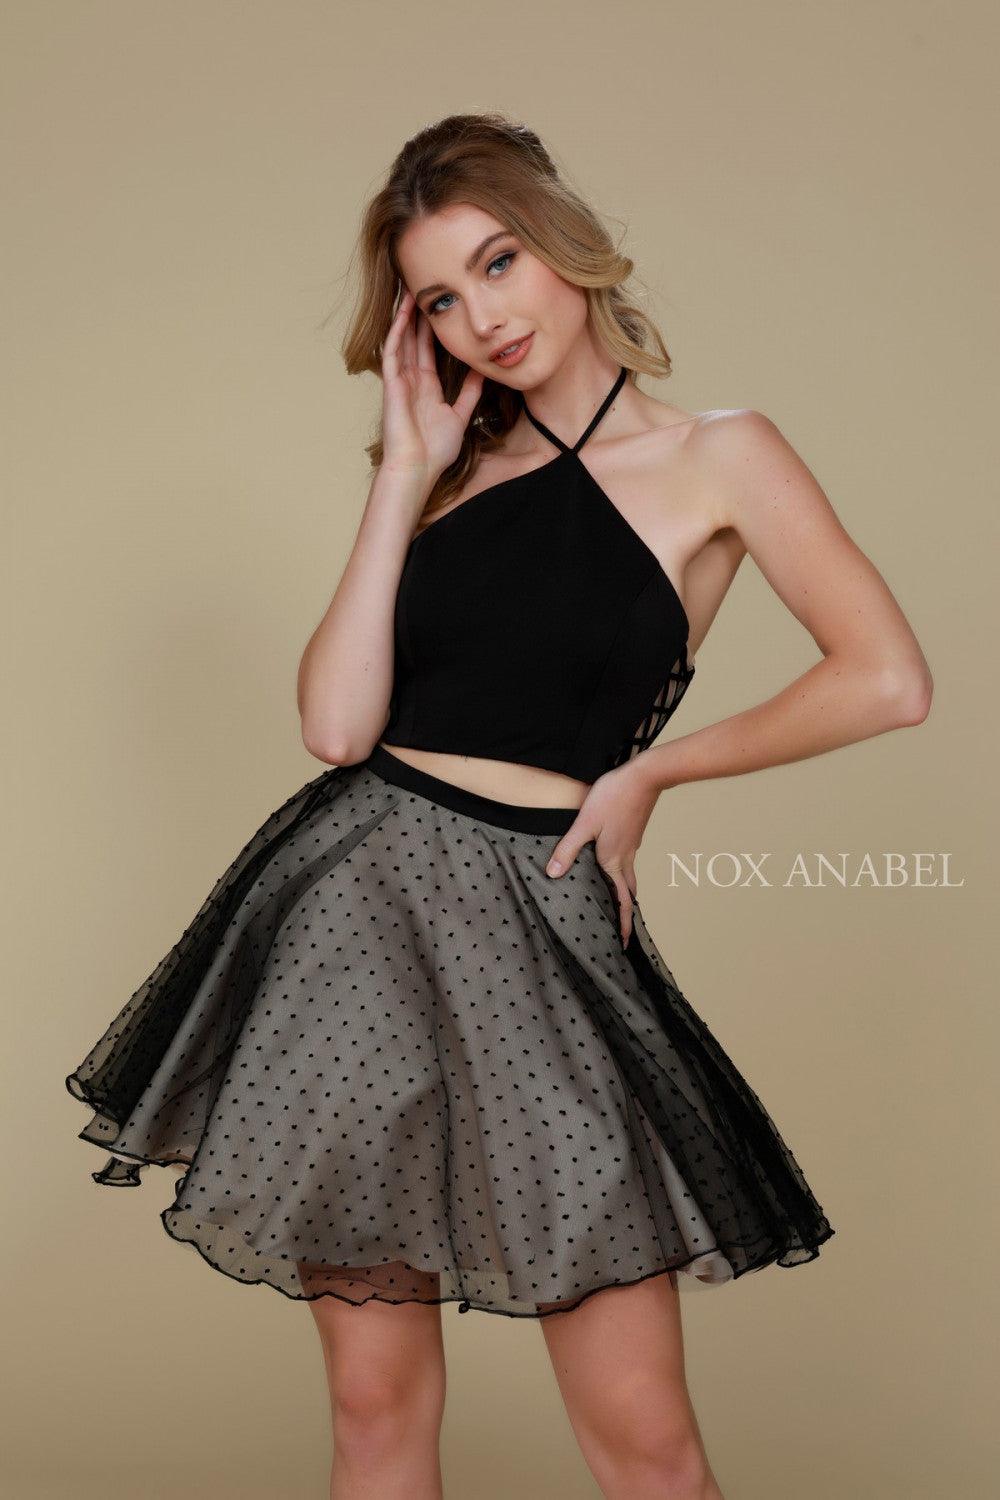 High-Neck Sexy Two Piece Crop Top Prom Dress Black/Nude - The Dress Outlet Nox Anabel